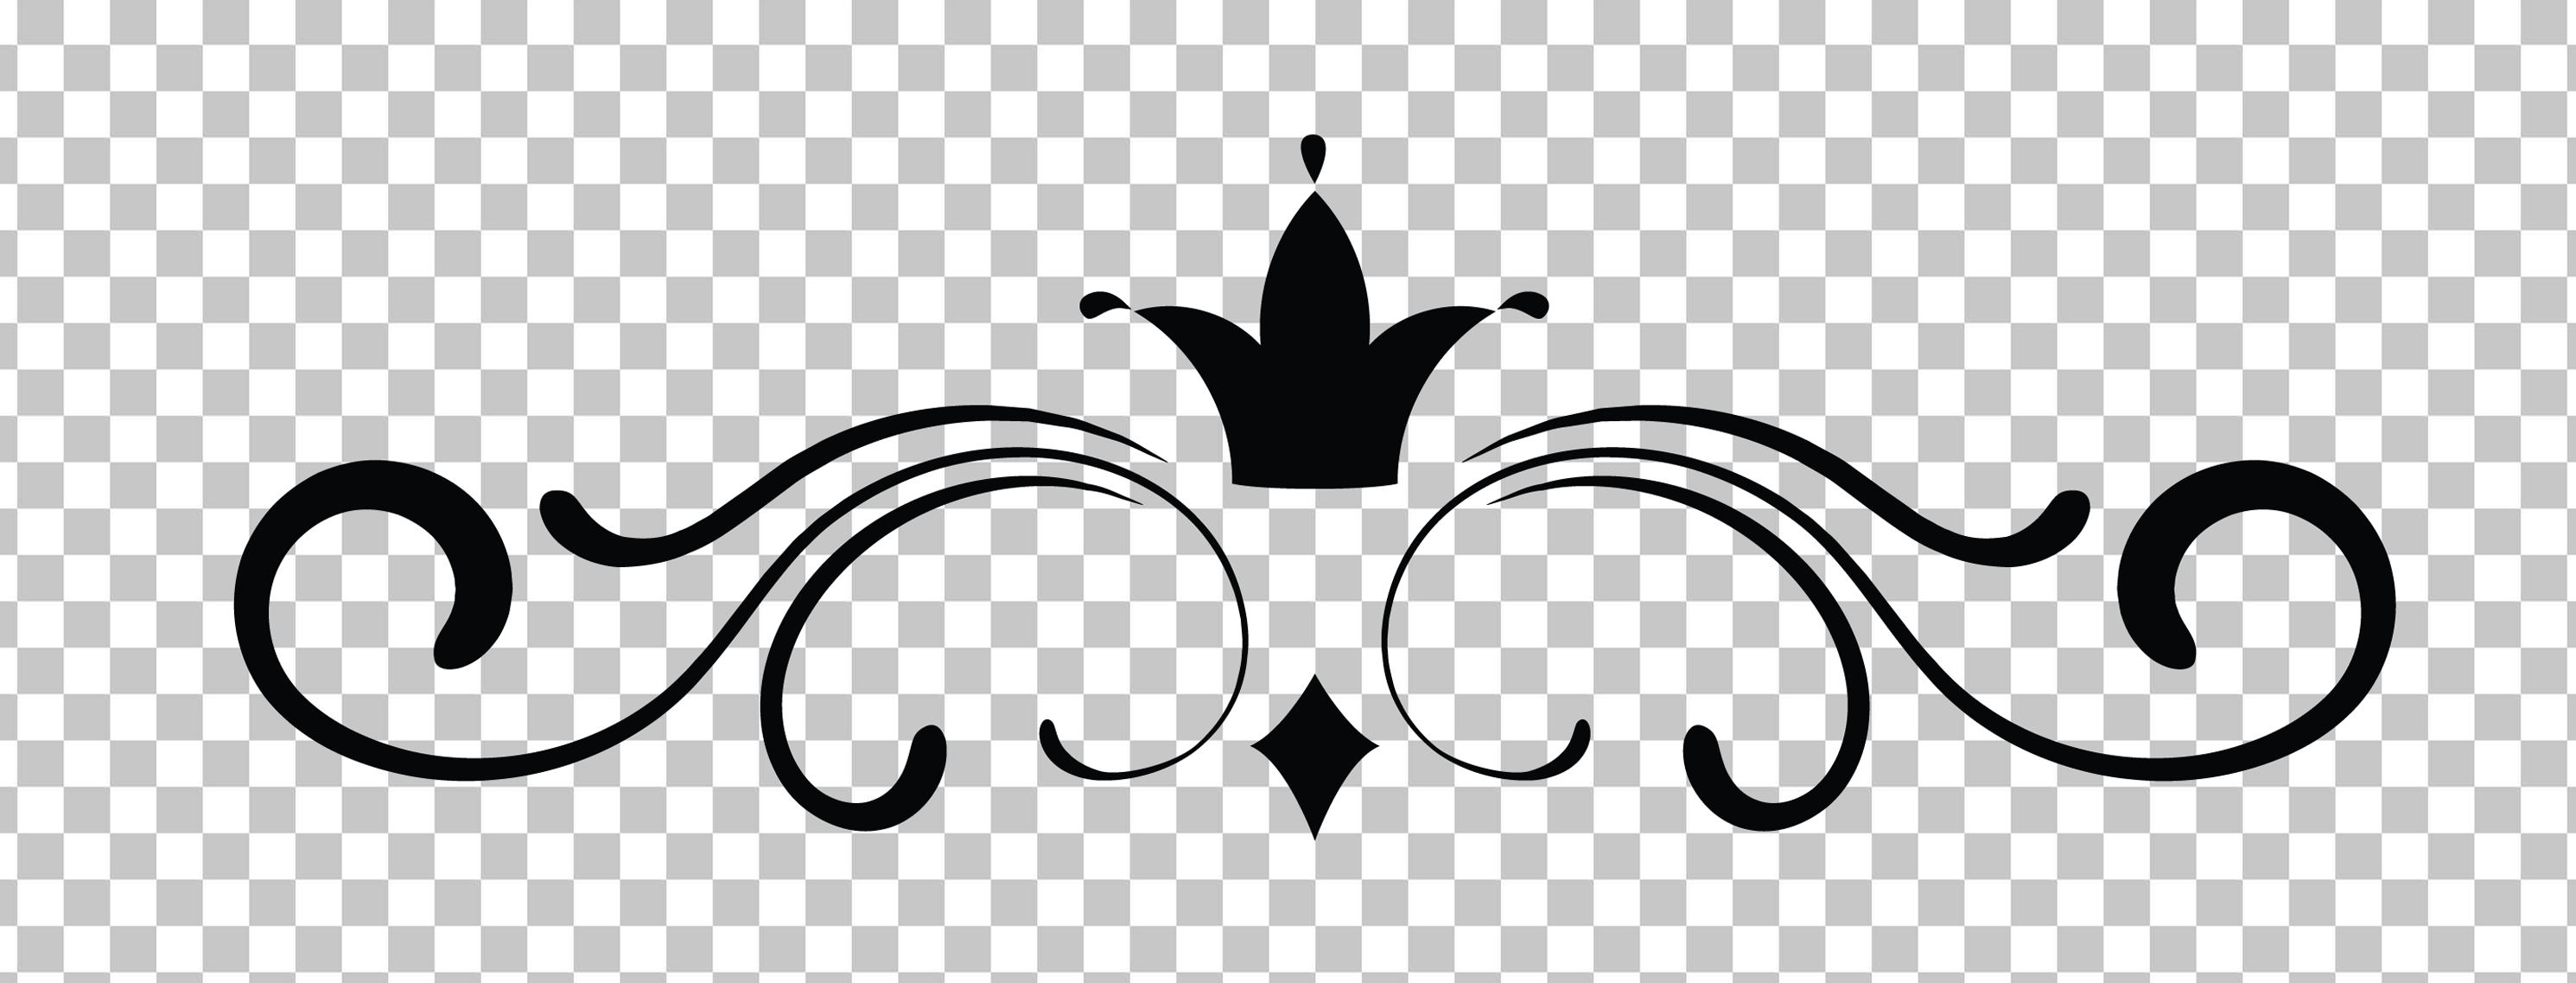 Black Swirl Crown Page decor PNG image